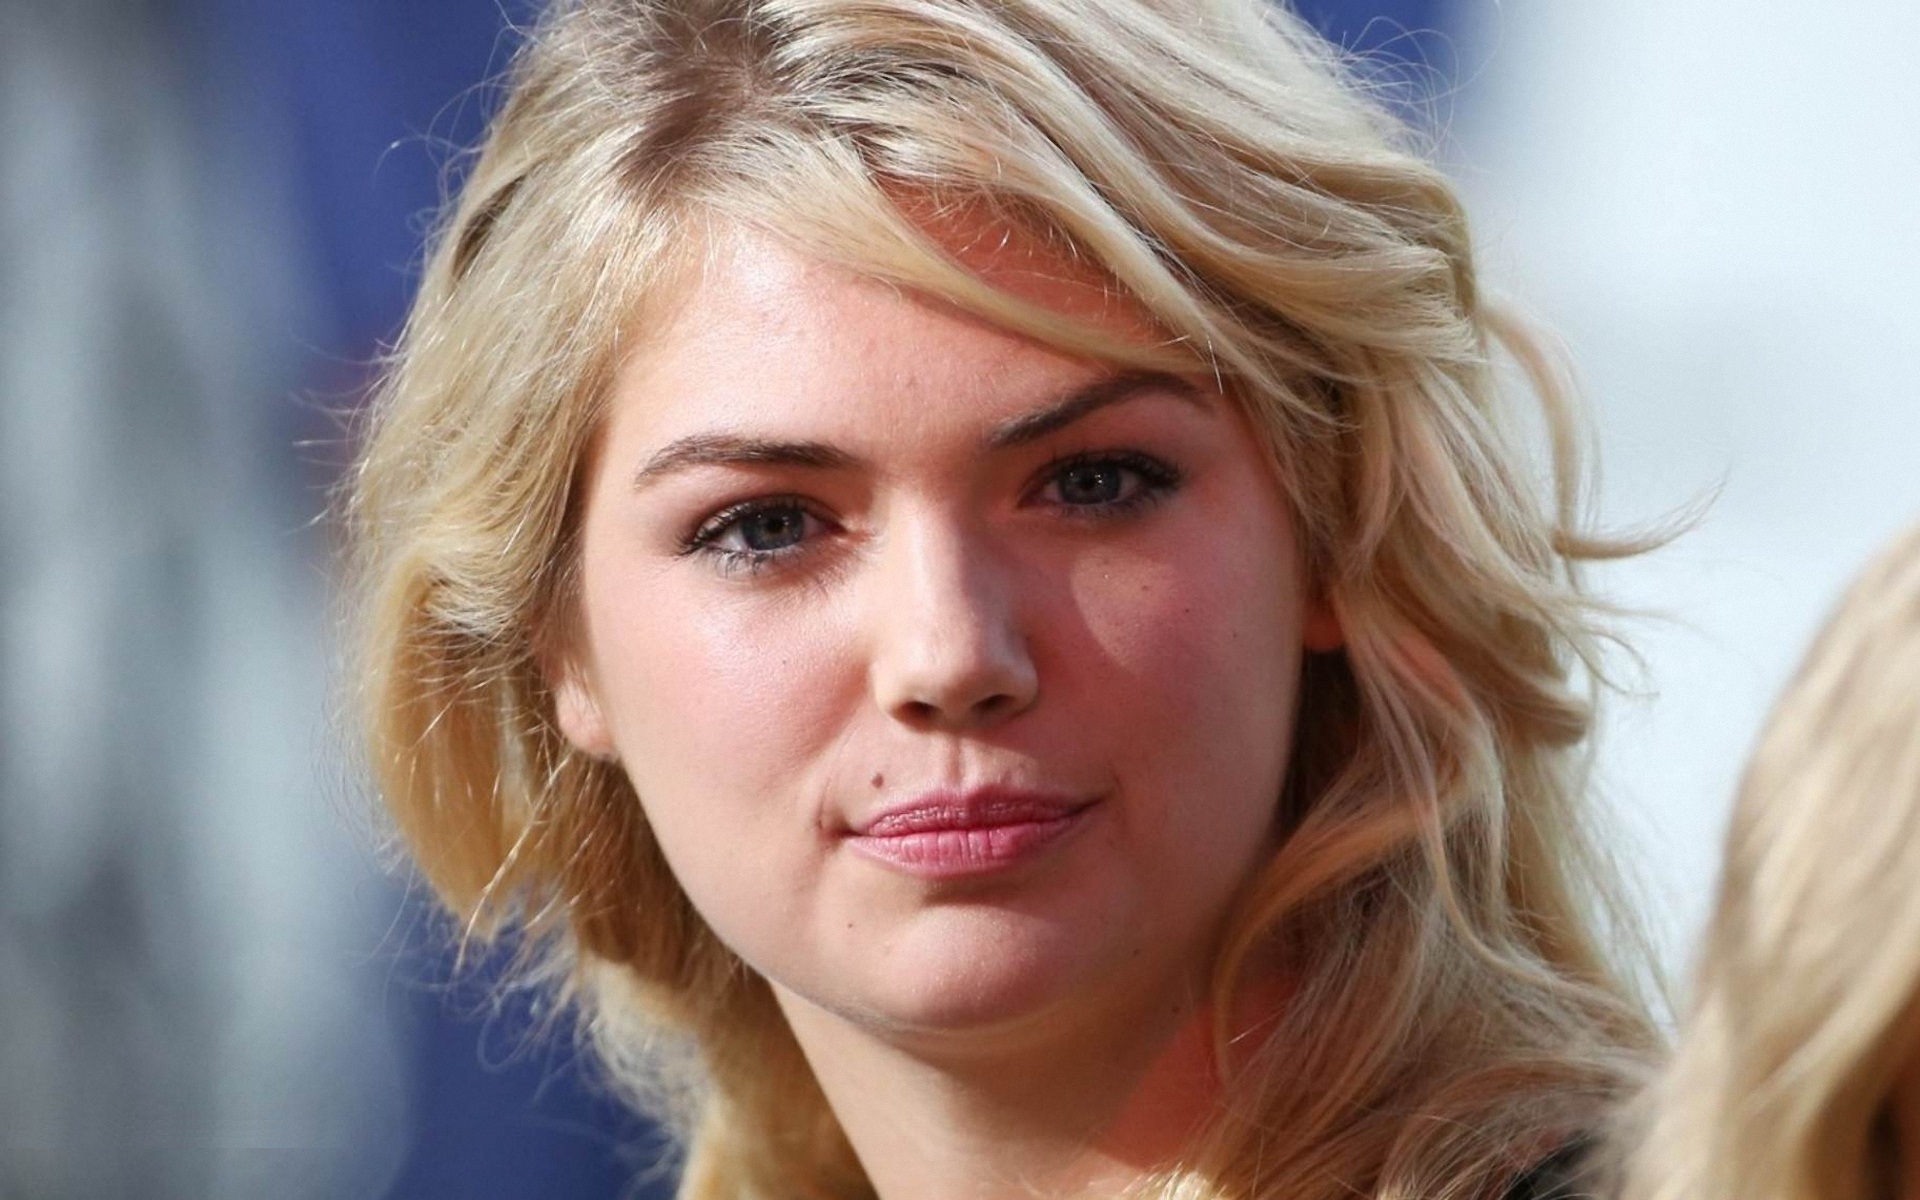 Kate Upton High Resolution Full Wide HD Wallpaper